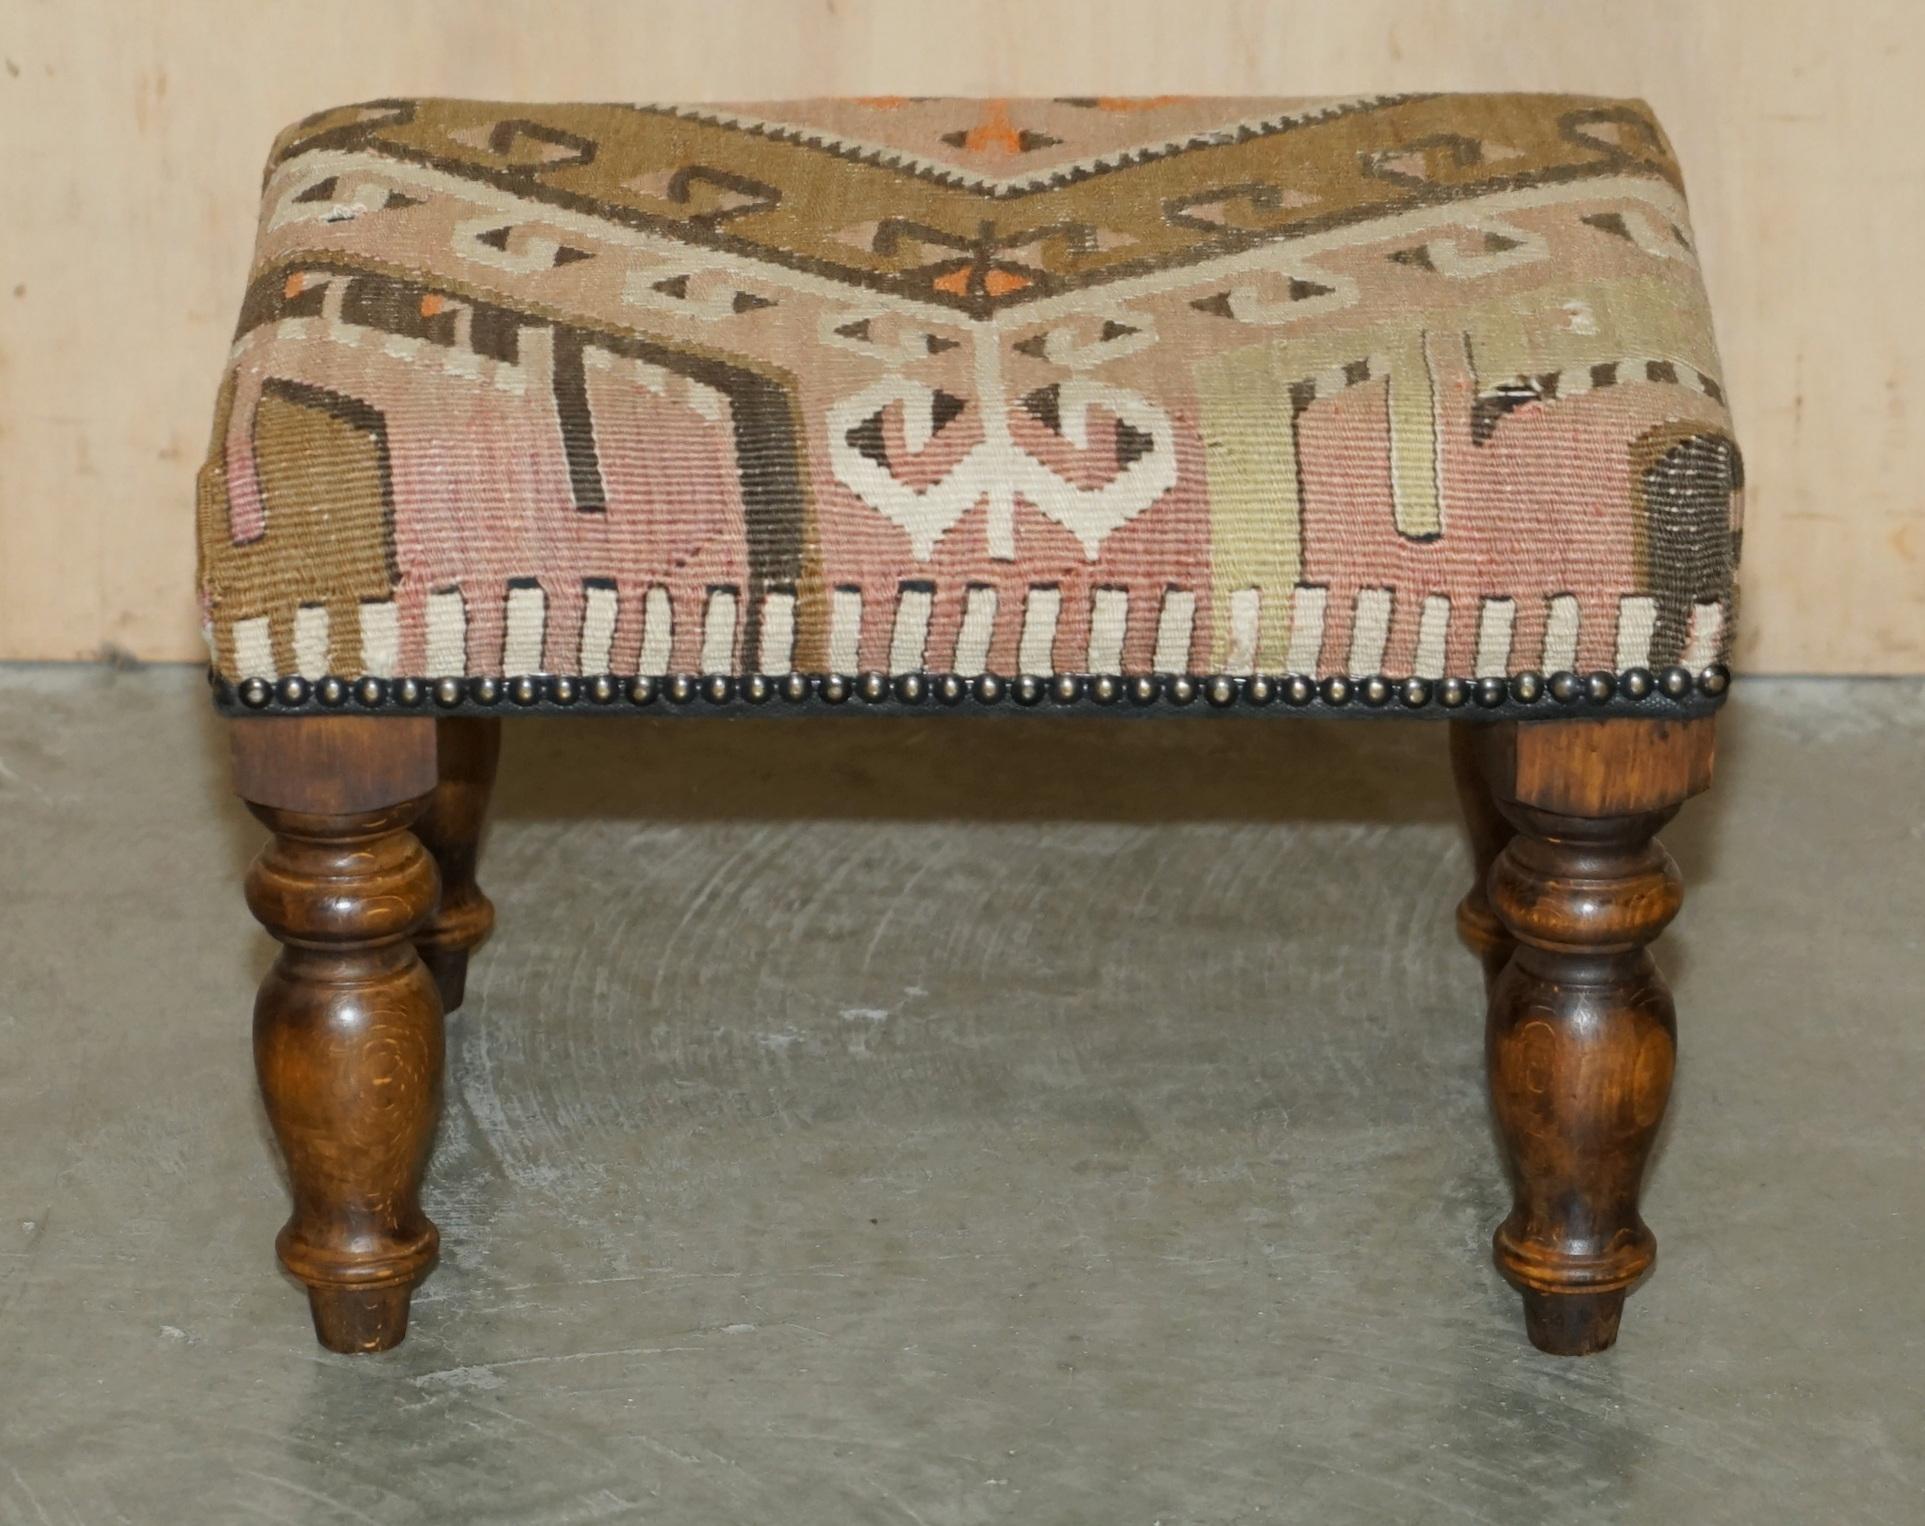 STUNNiNG & COLLECTABLE VINTAGE GEORGE SMITH CHELSEA KILIM FOOTSTOOL OTTOMAN For Sale 1